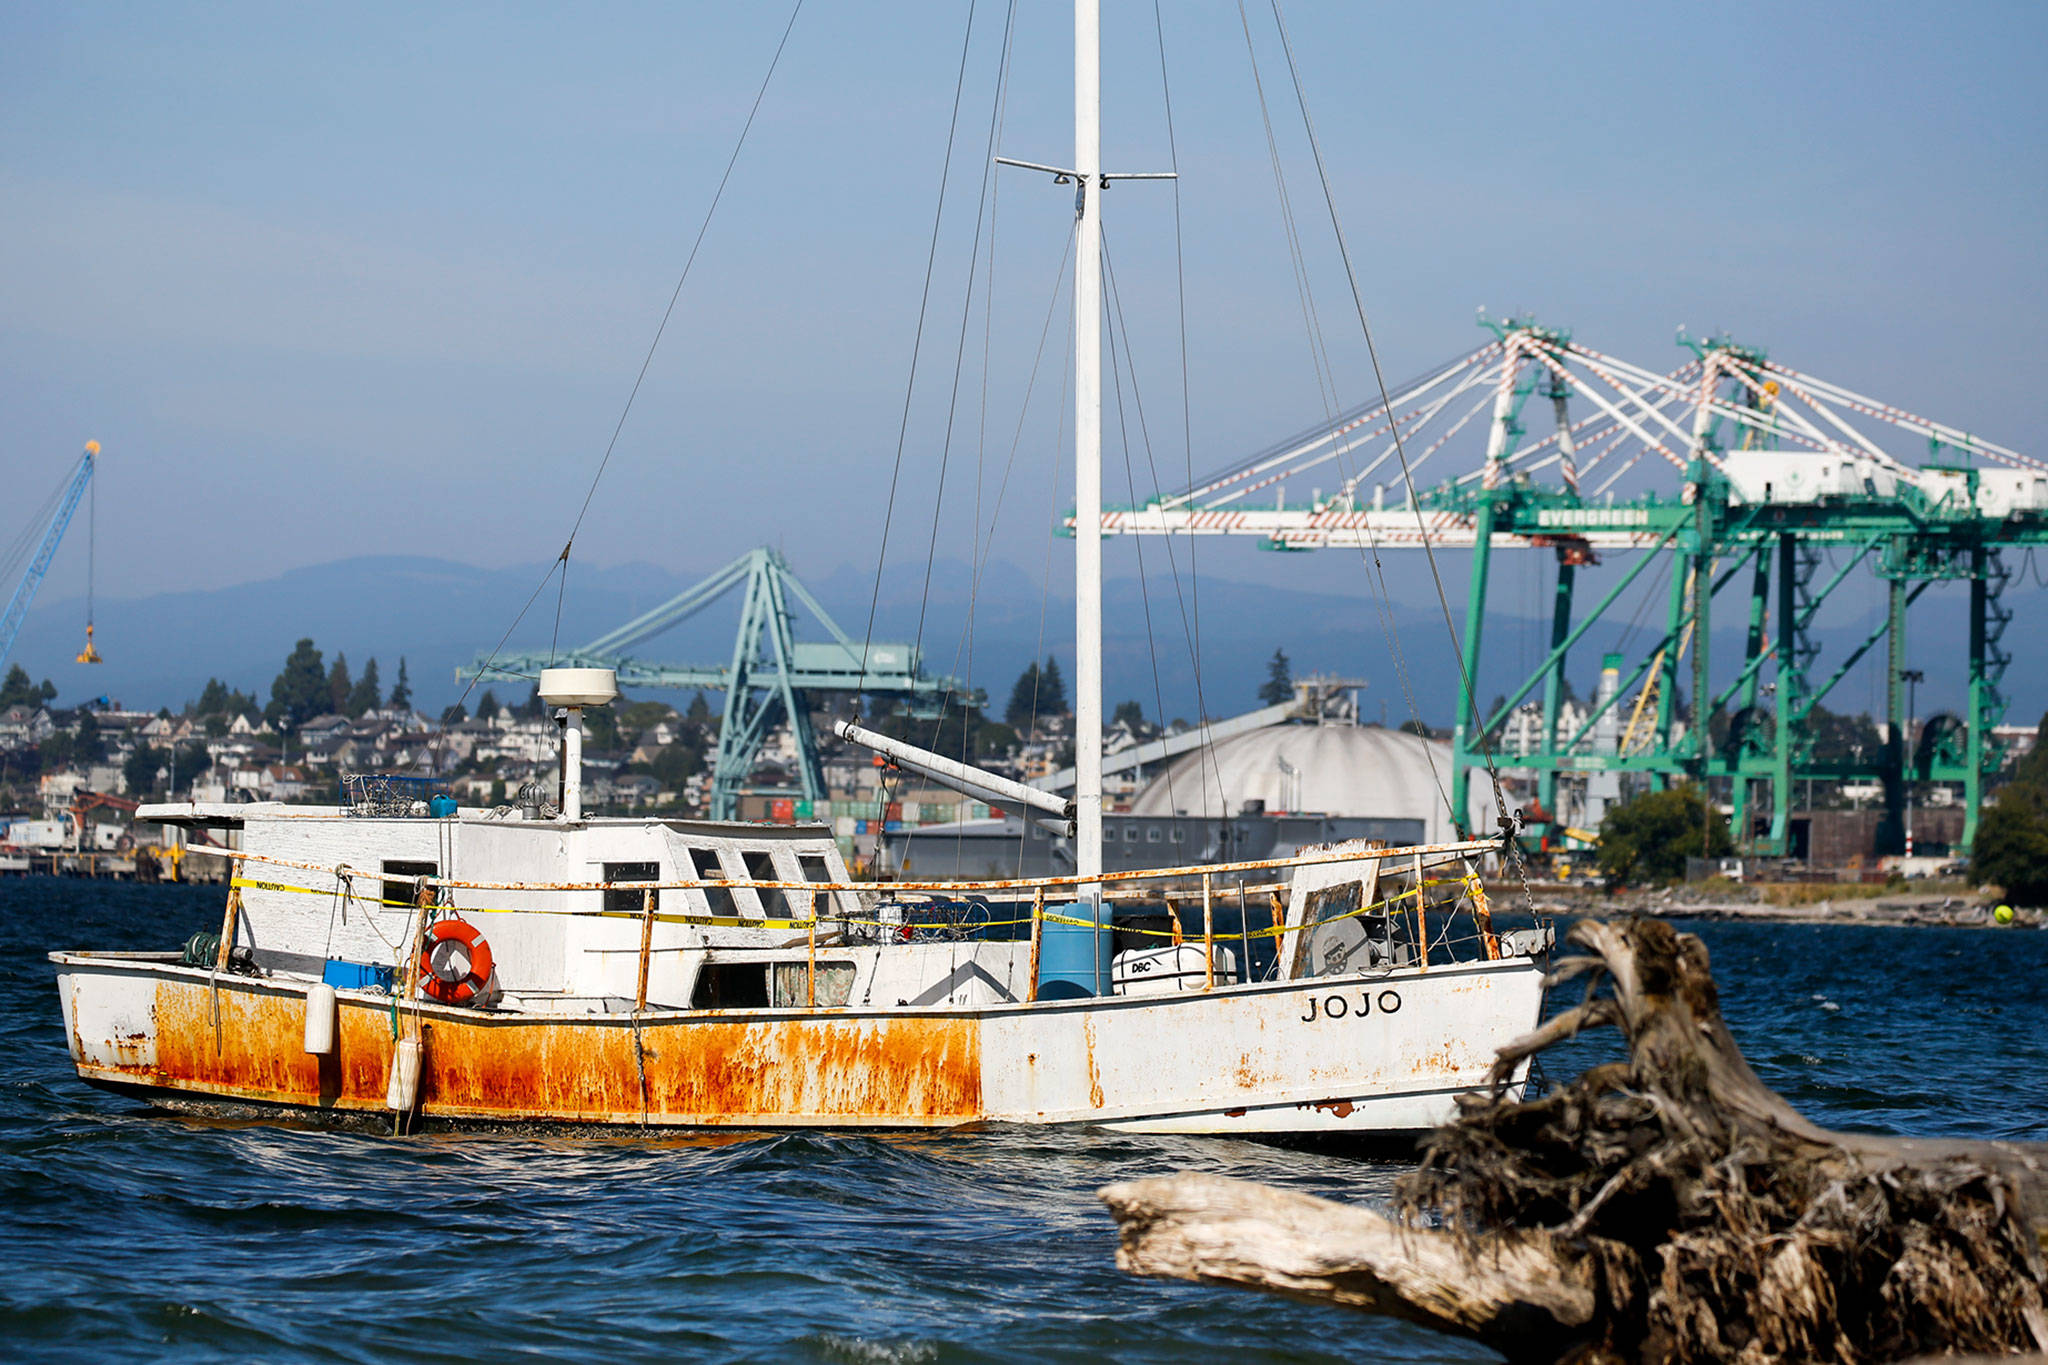 The JoJo washed ashore at Howarth Park in Everett. The city and state are working together to find out if they need to take control of the boat, or if the owner can move it on his own. (Kevin Clark / The Herald)